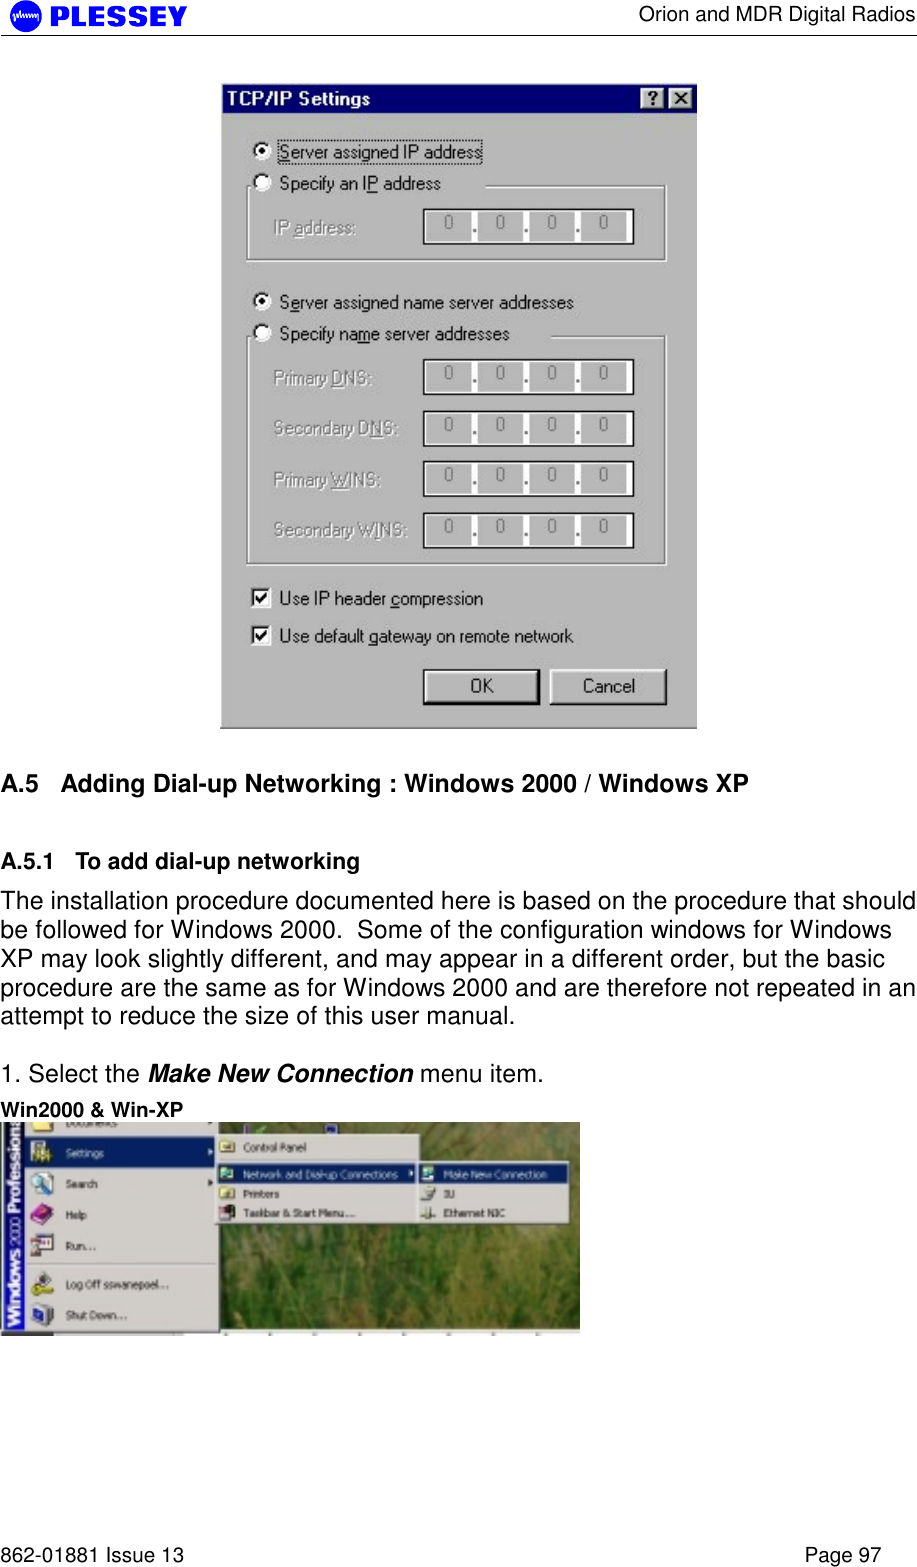      Orion and MDR Digital Radios   862-01881 Issue 13    Page 97   A.5  Adding Dial-up Networking : Windows 2000 / Windows XP A.5.1  To add dial-up networking The installation procedure documented here is based on the procedure that should be followed for Windows 2000.  Some of the configuration windows for Windows XP may look slightly different, and may appear in a different order, but the basic procedure are the same as for Windows 2000 and are therefore not repeated in an attempt to reduce the size of this user manual.  1. Select the Make New Connection menu item. Win2000 &amp; Win-XP  